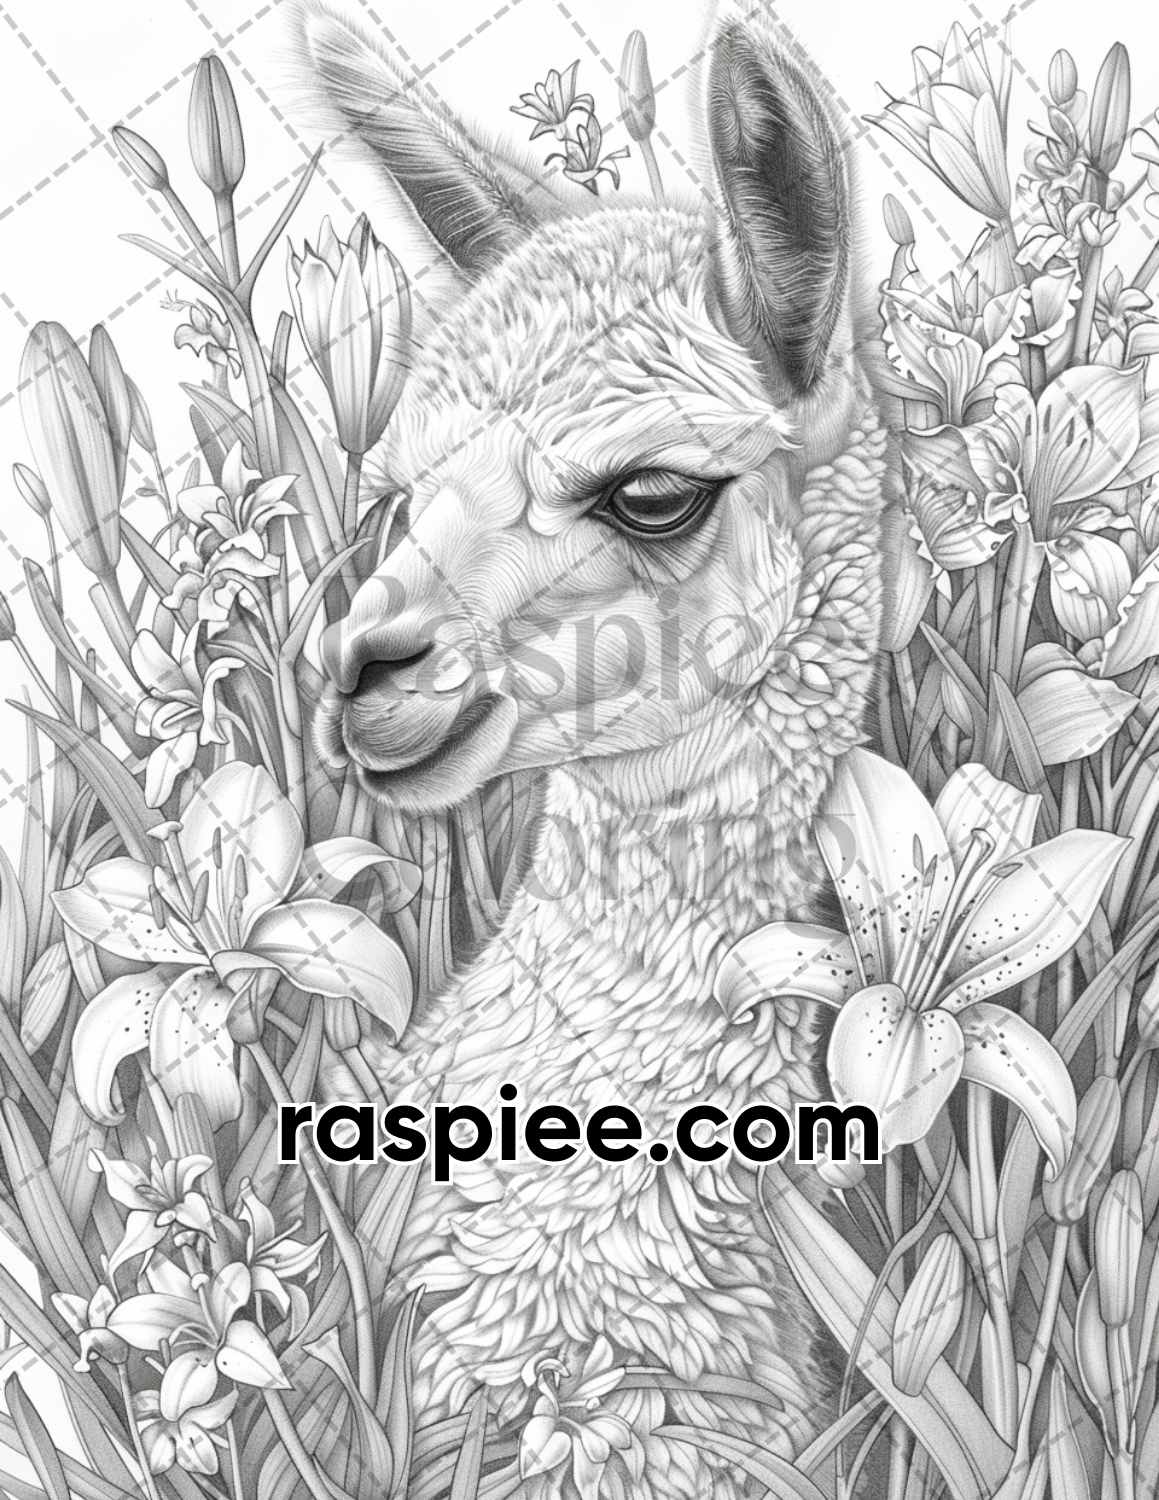 adult coloring pages, adult coloring sheets, adult coloring book pdf, adult coloring book printable, grayscale coloring pages, grayscale coloring books, baby animals coloring pages for adults, baby animals coloring book, grayscale illustration